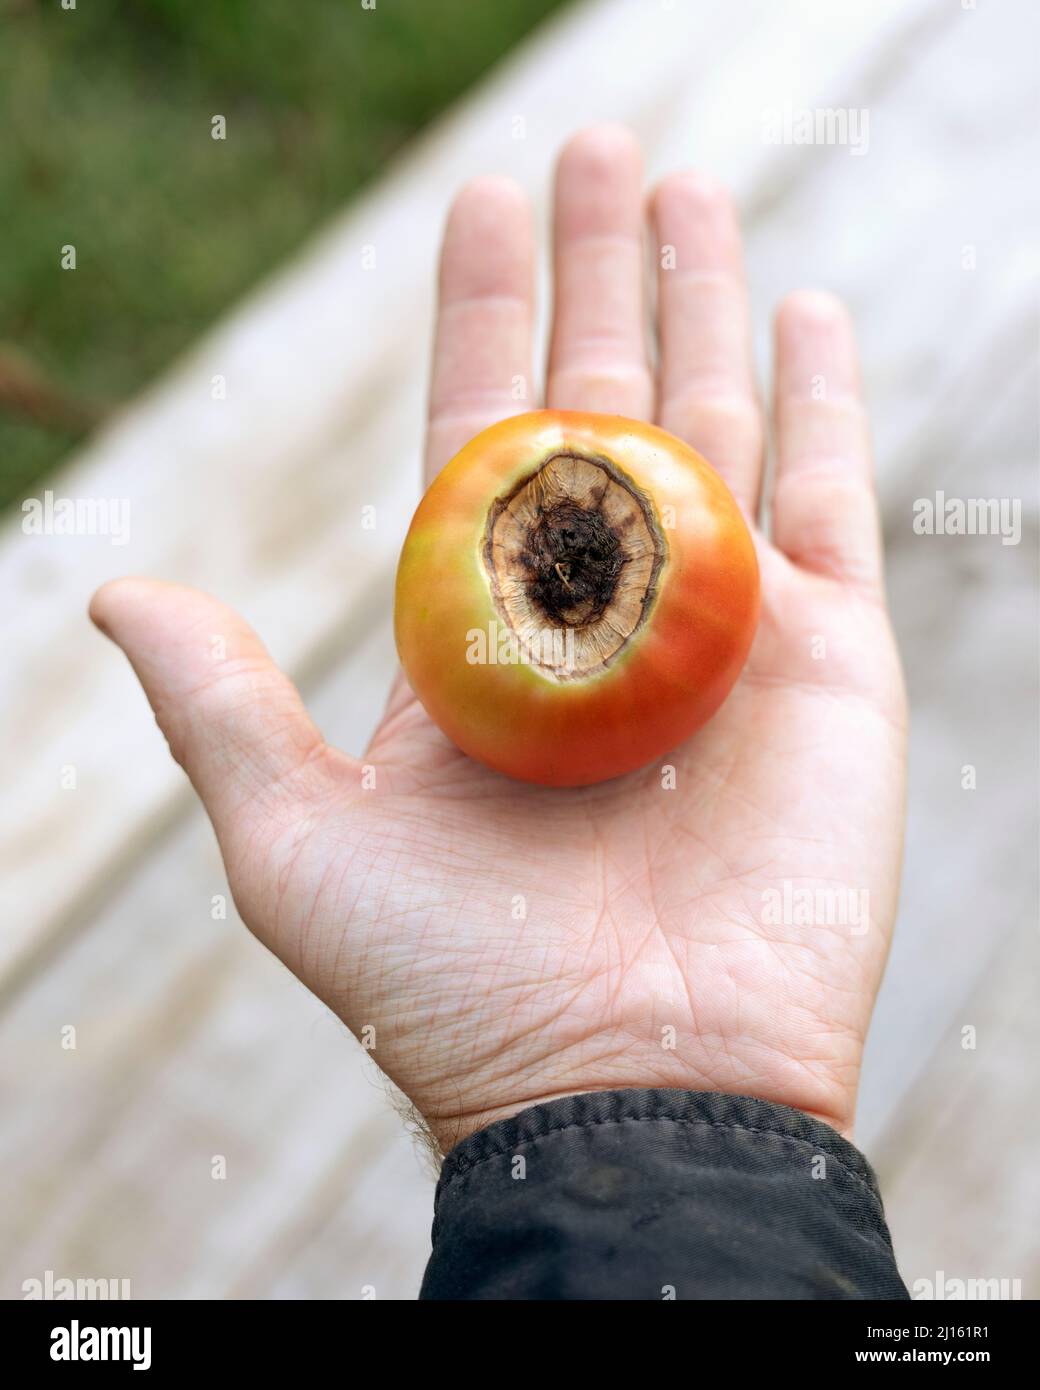 man holds tomato with rotten top, fruit is infected with fungal disease Stock Photo